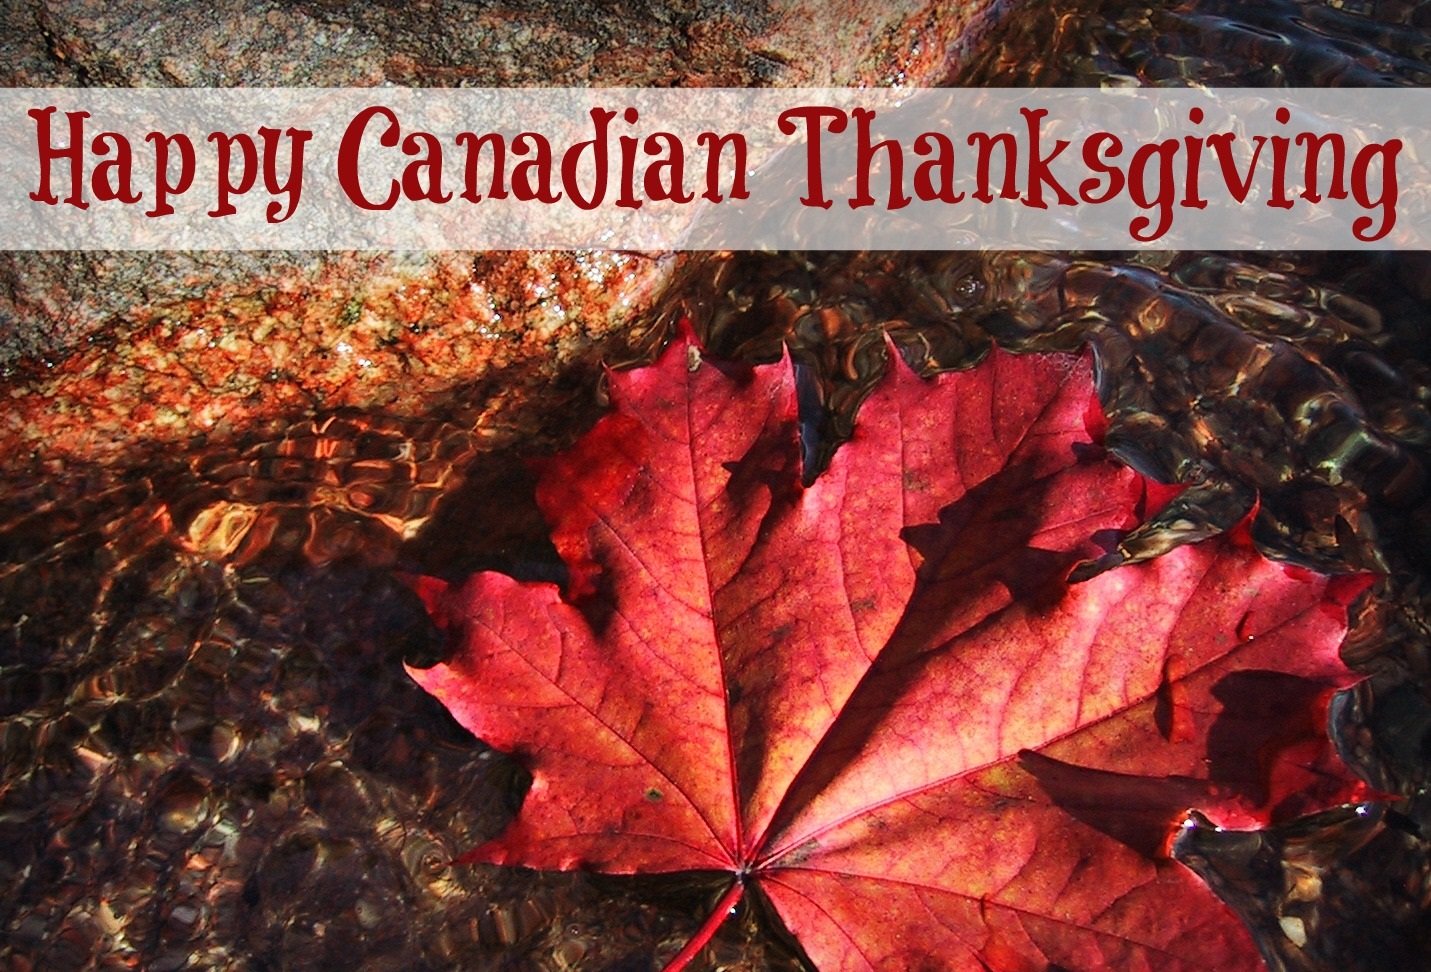 Canadian Thanksgiving Pictures, Images